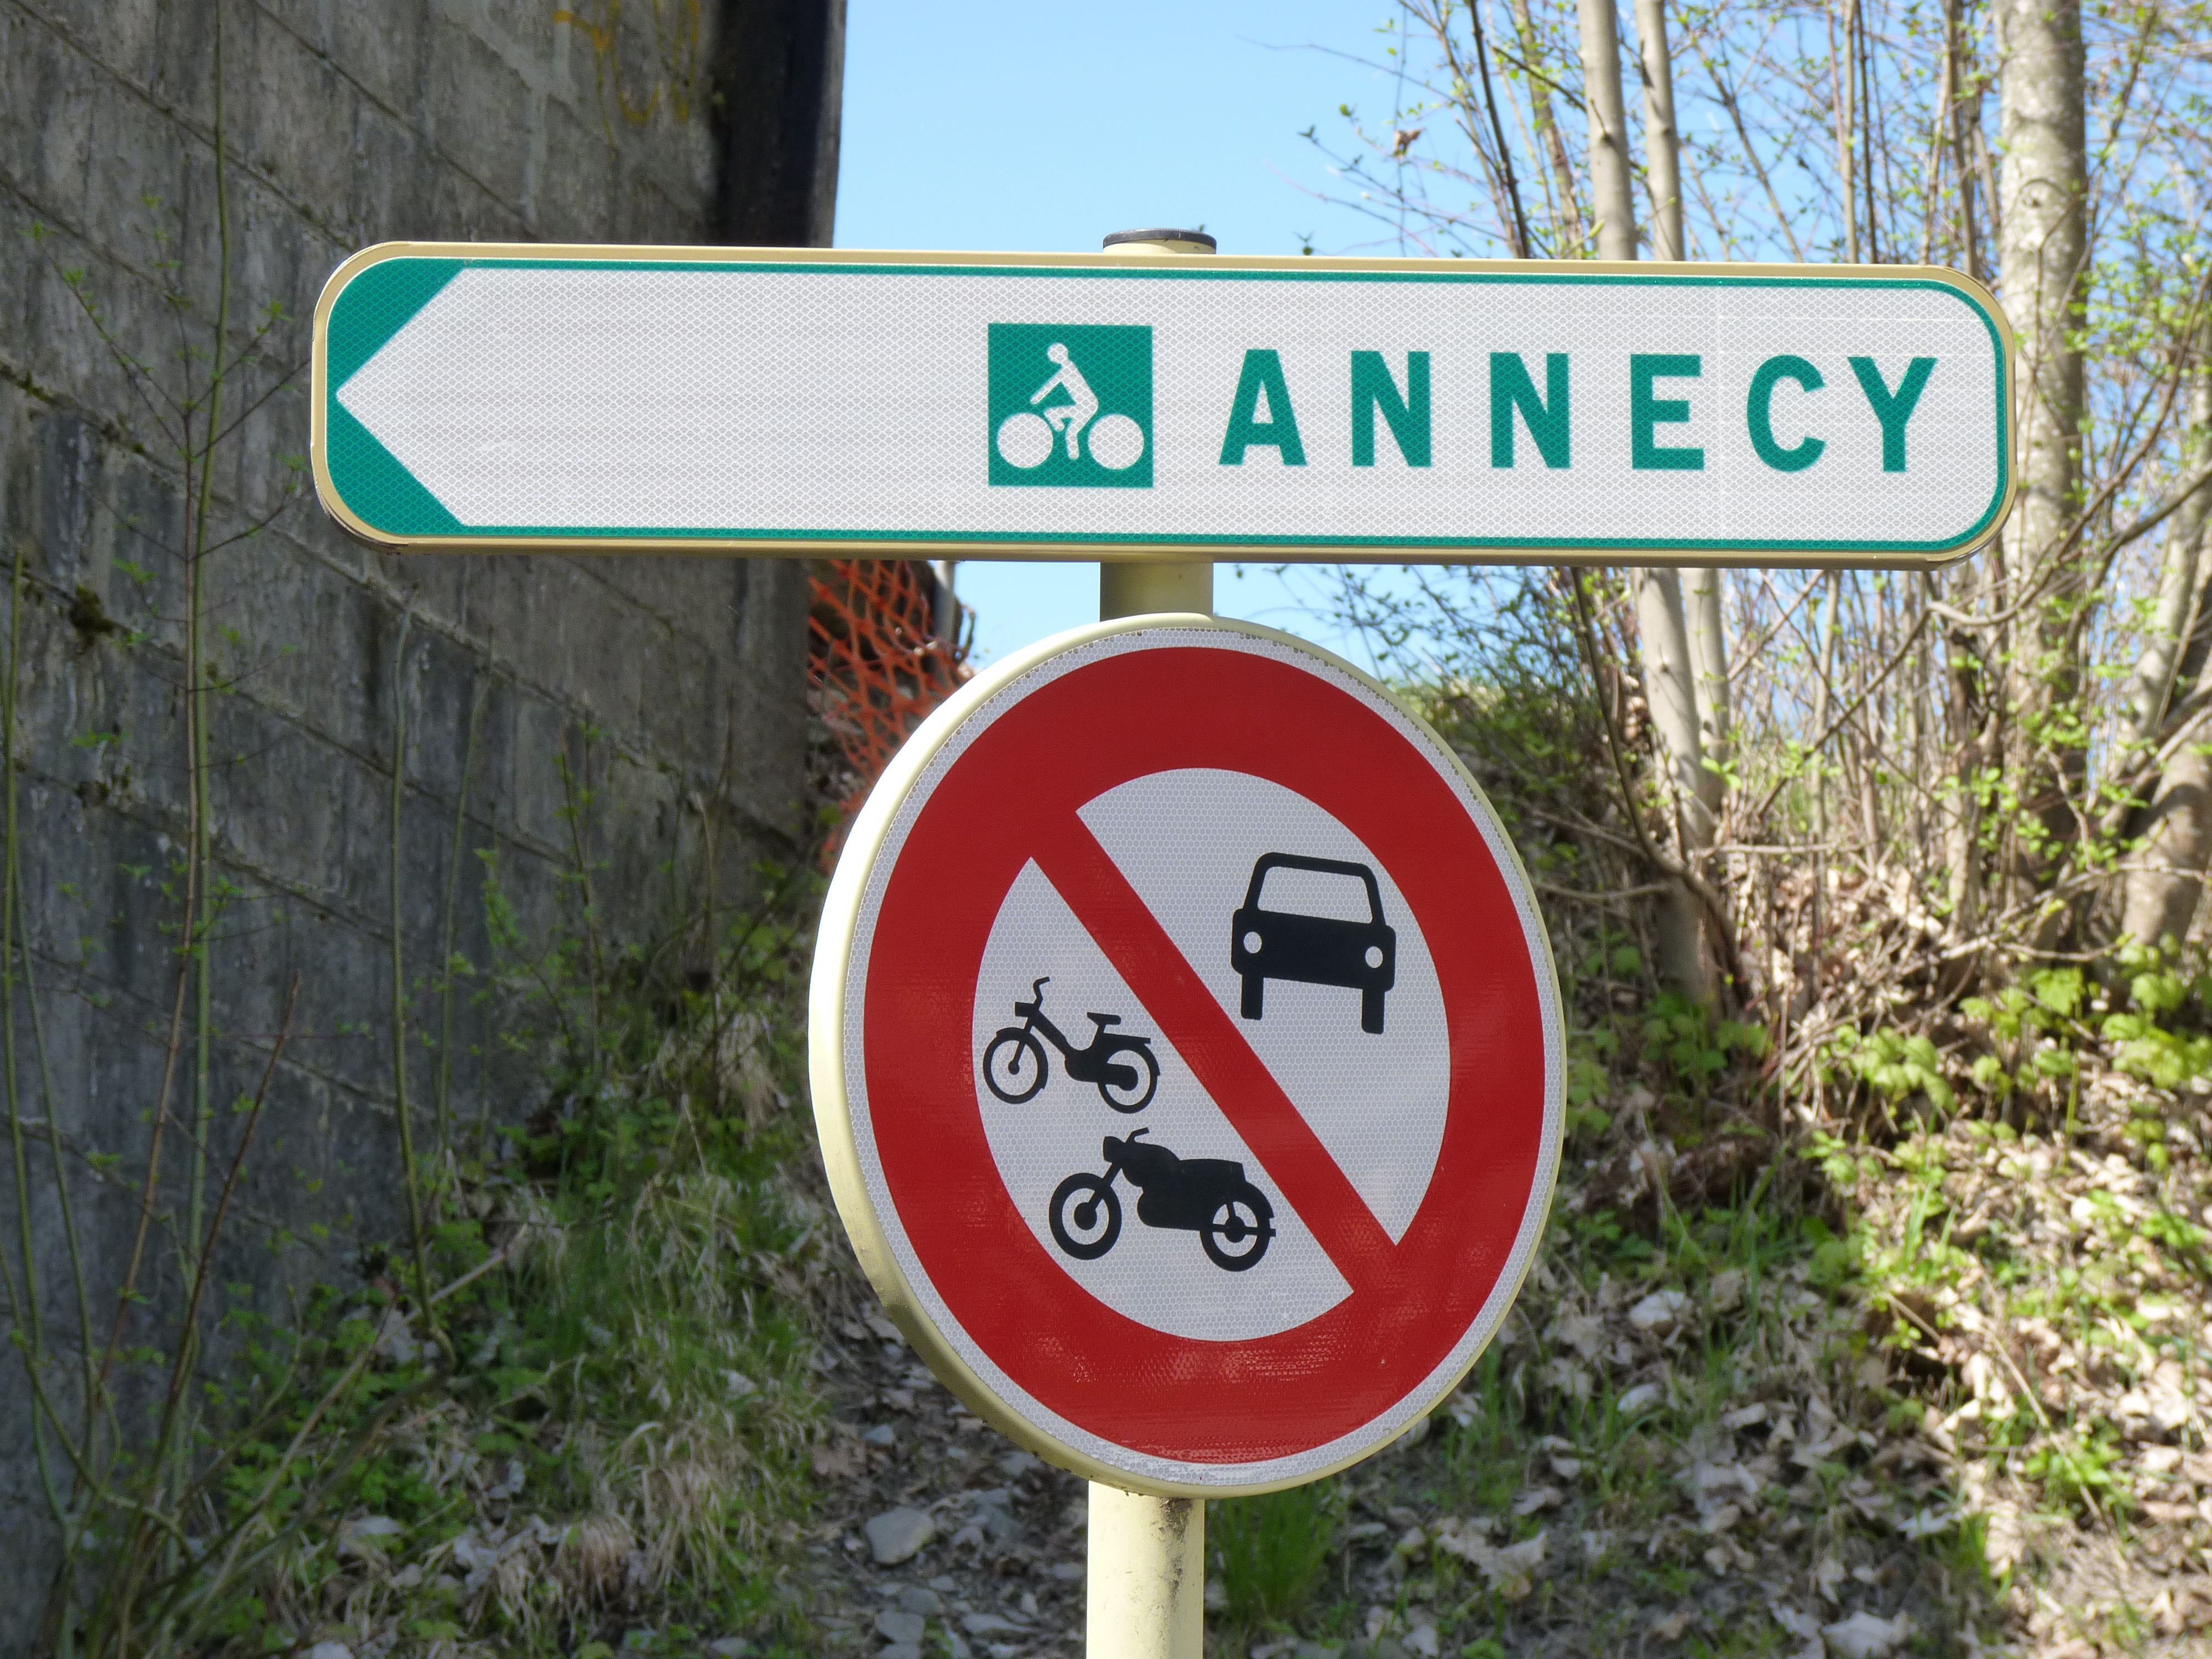 Annecy road sign